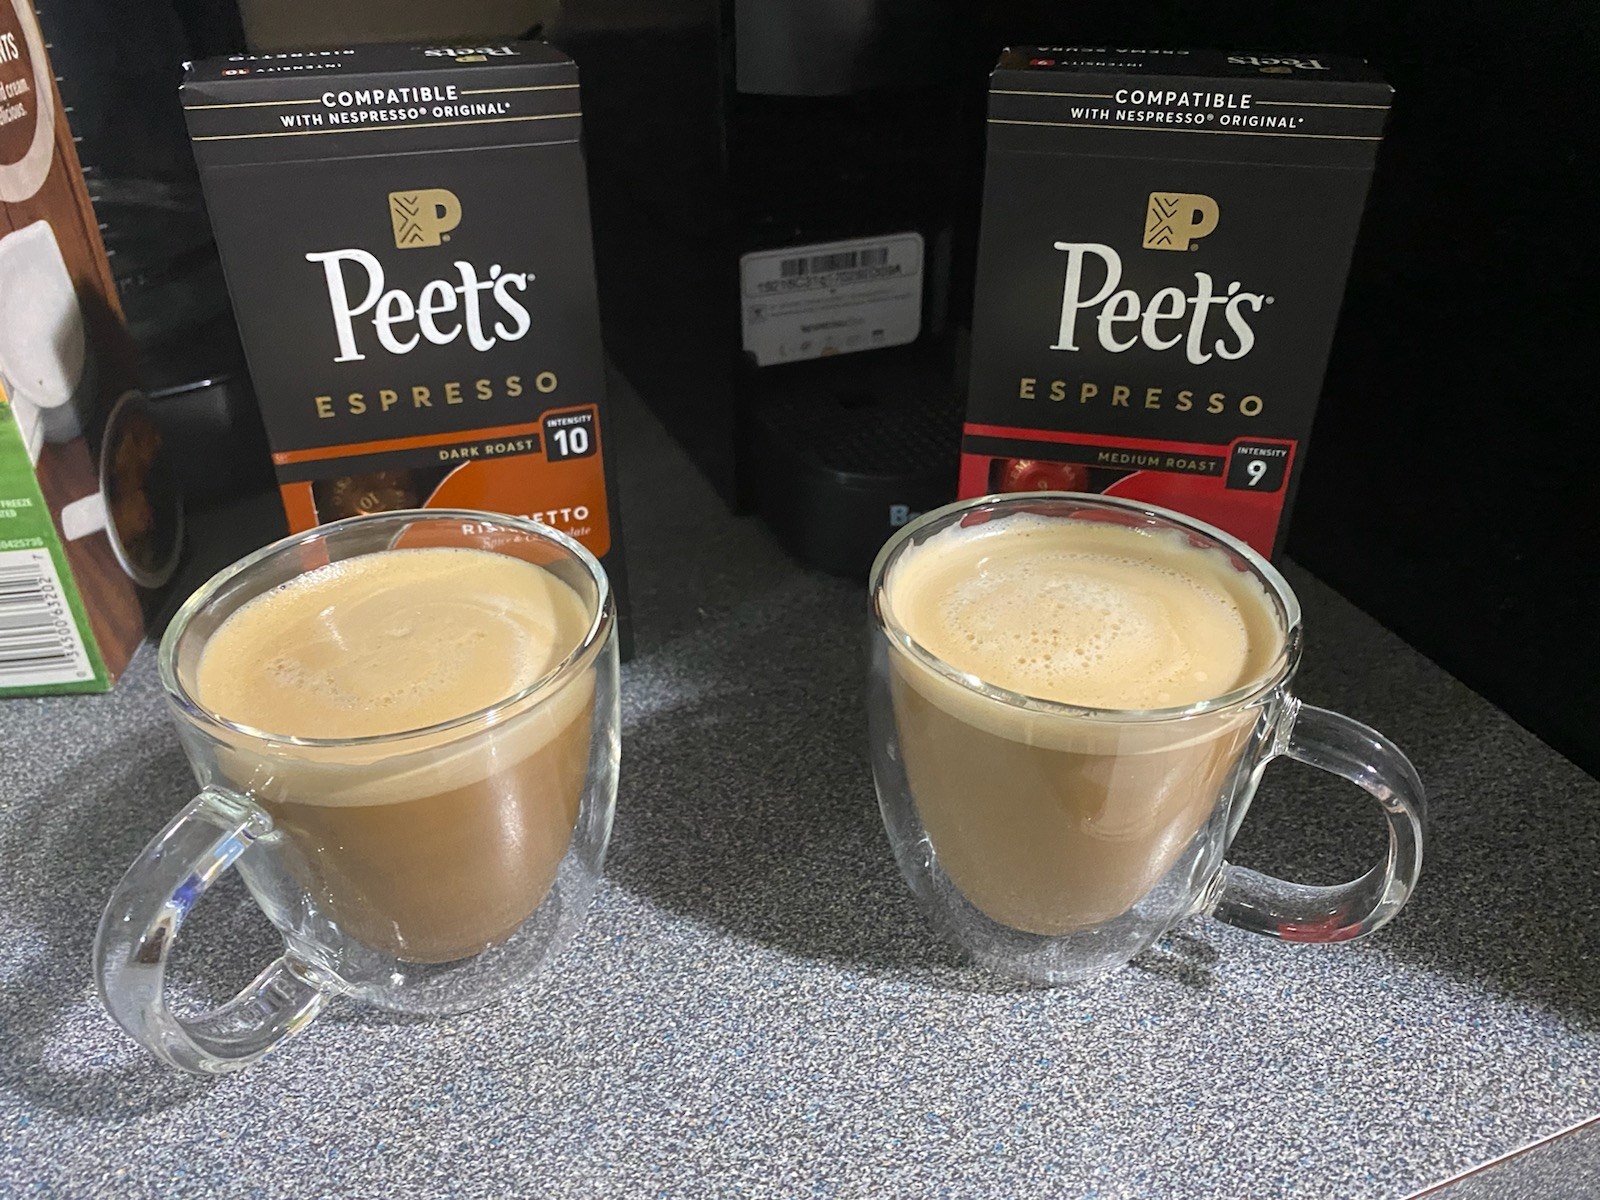 the two espresso cups holding coffee in them in front of two peet&#x27;s espresso bags